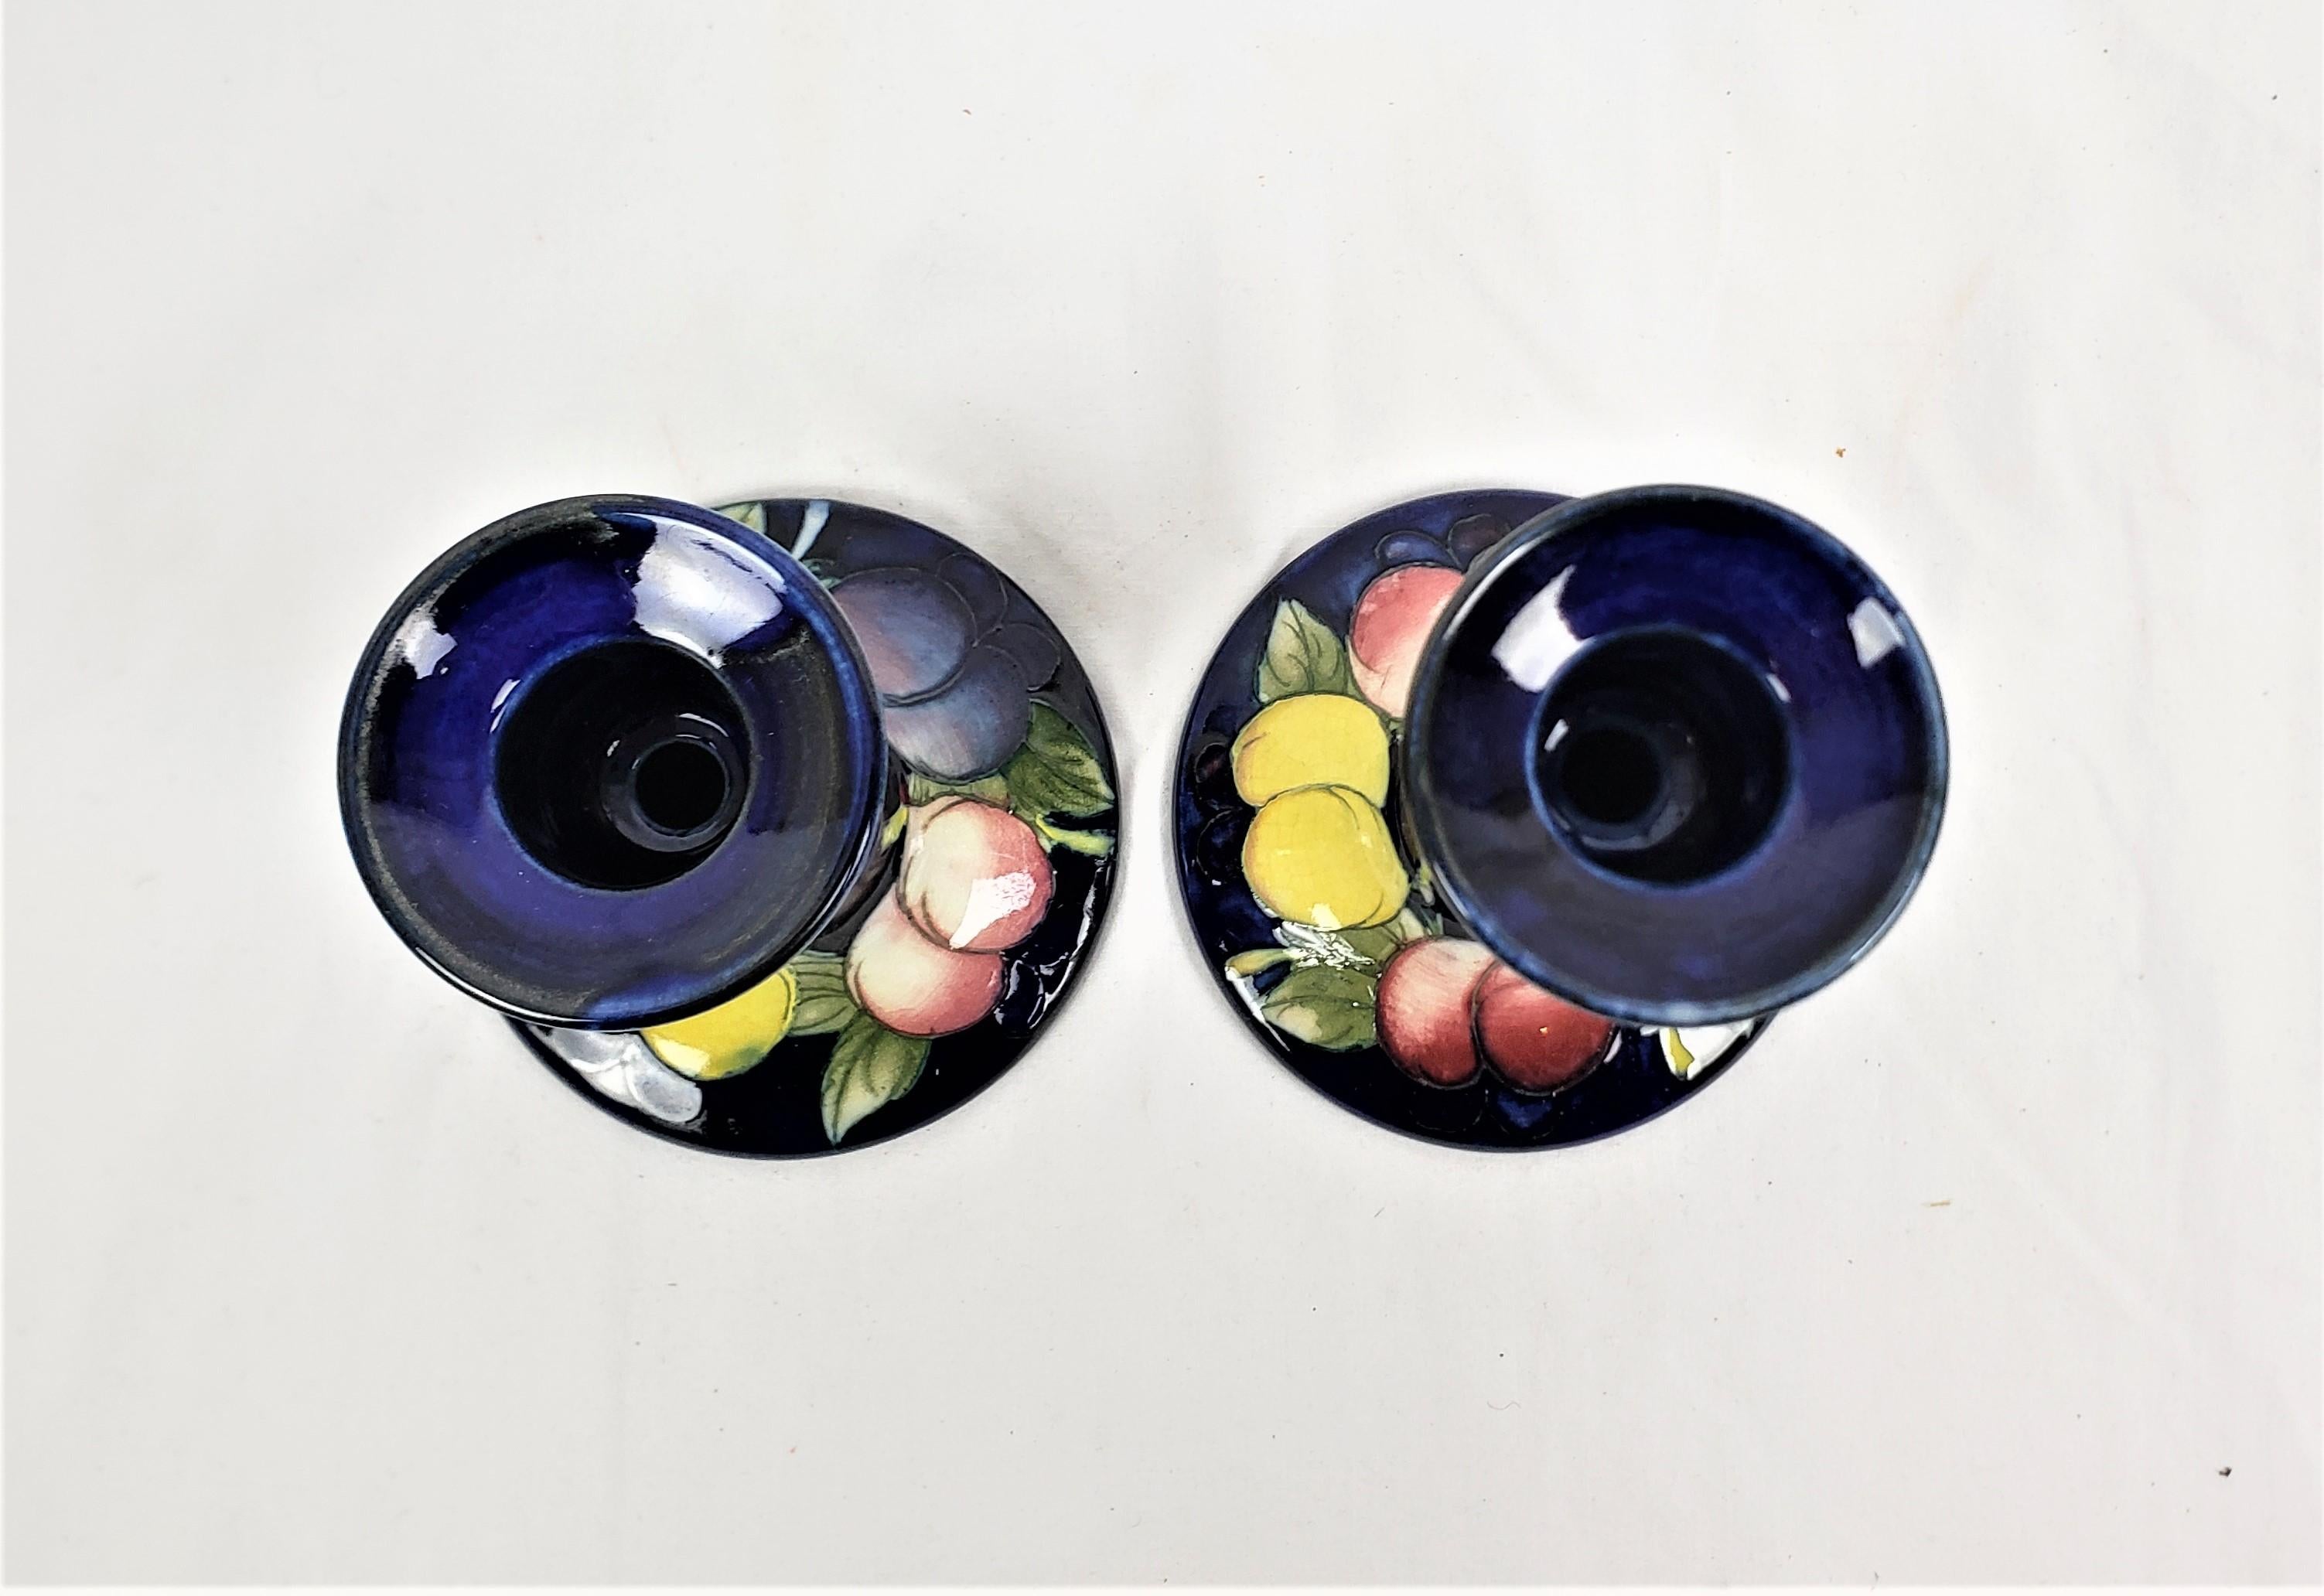 Pair of Antique Moorcroft Art Pottery Candlesticks in the Wisteria Pattern In Good Condition For Sale In Hamilton, Ontario